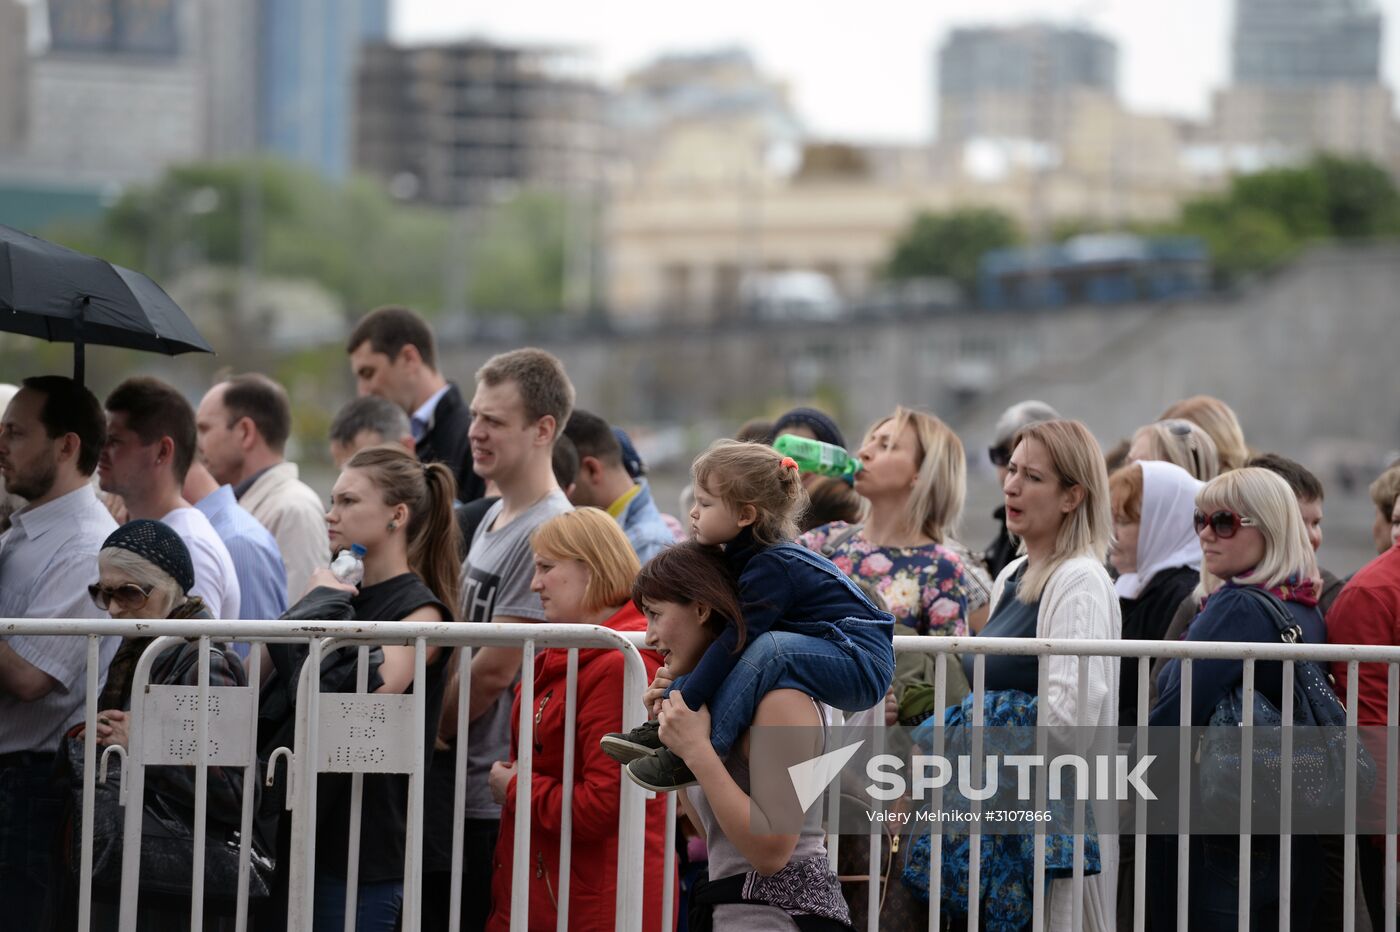 Pilgrims wait to see the holy relics of St. Nicholas the Miracle-Worker